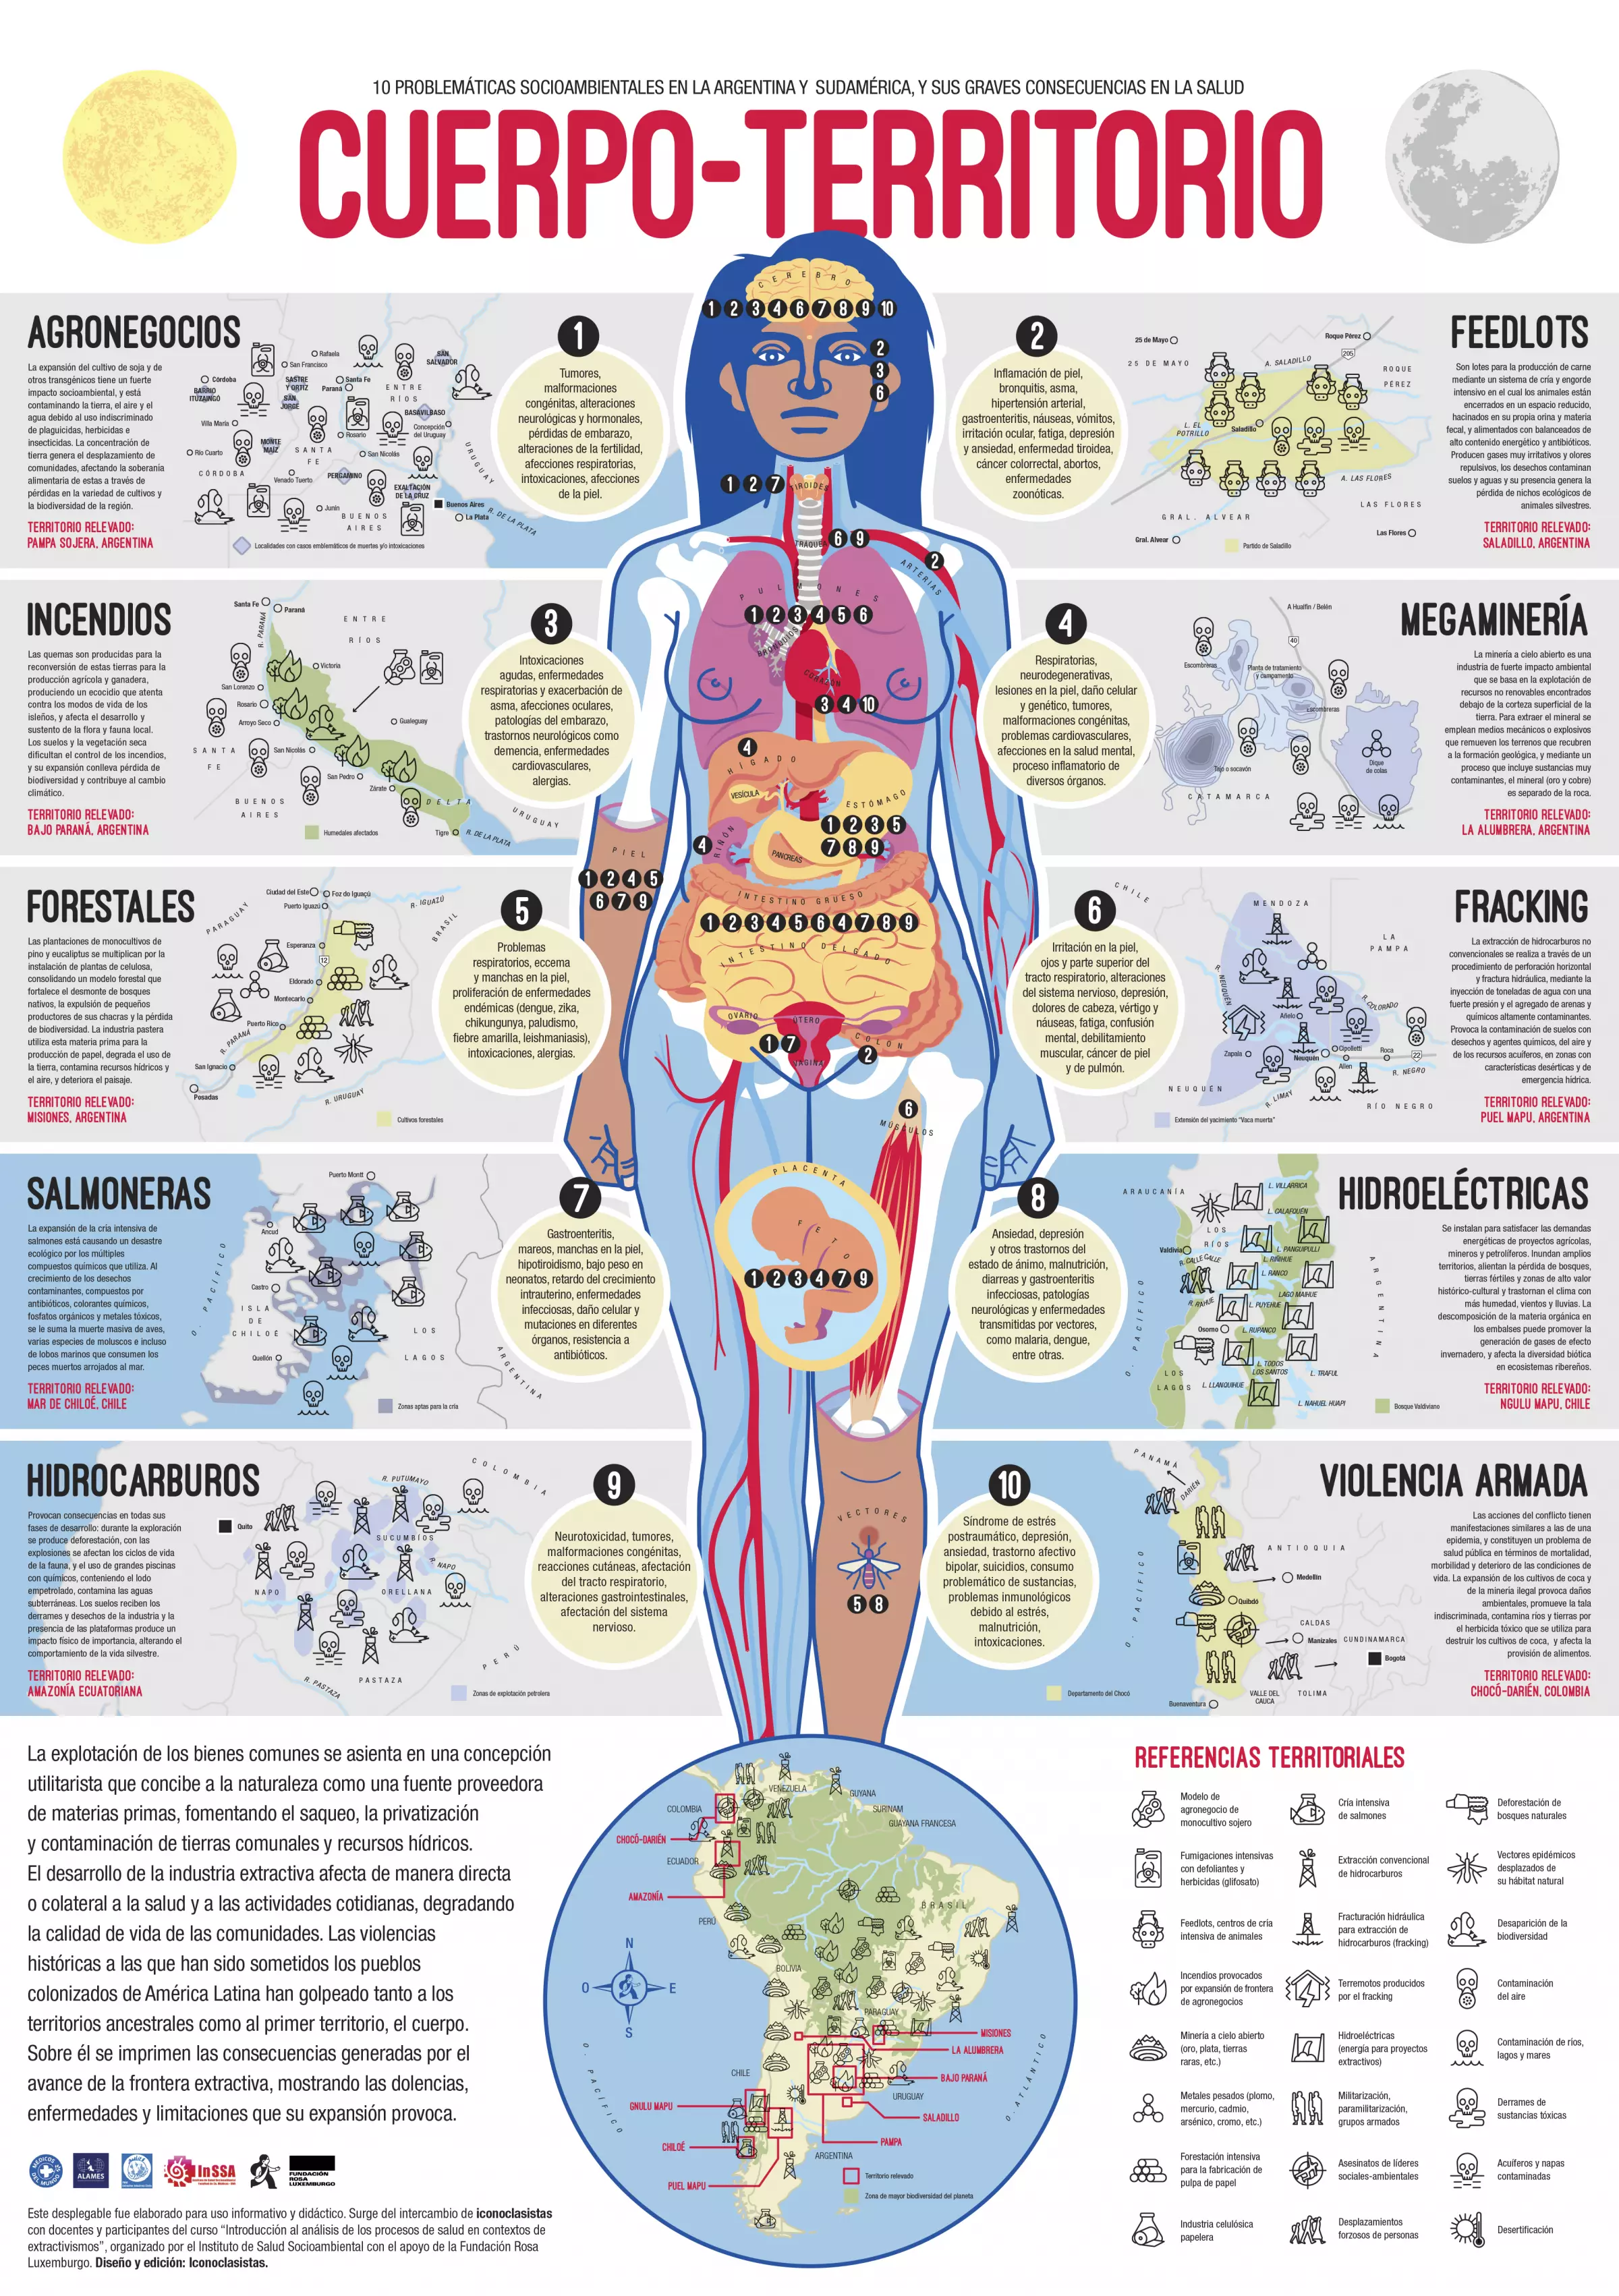 An anatomical poster titles 'cuerpo territorio' using the female form as a parable of environmental issues affecting regions of South America